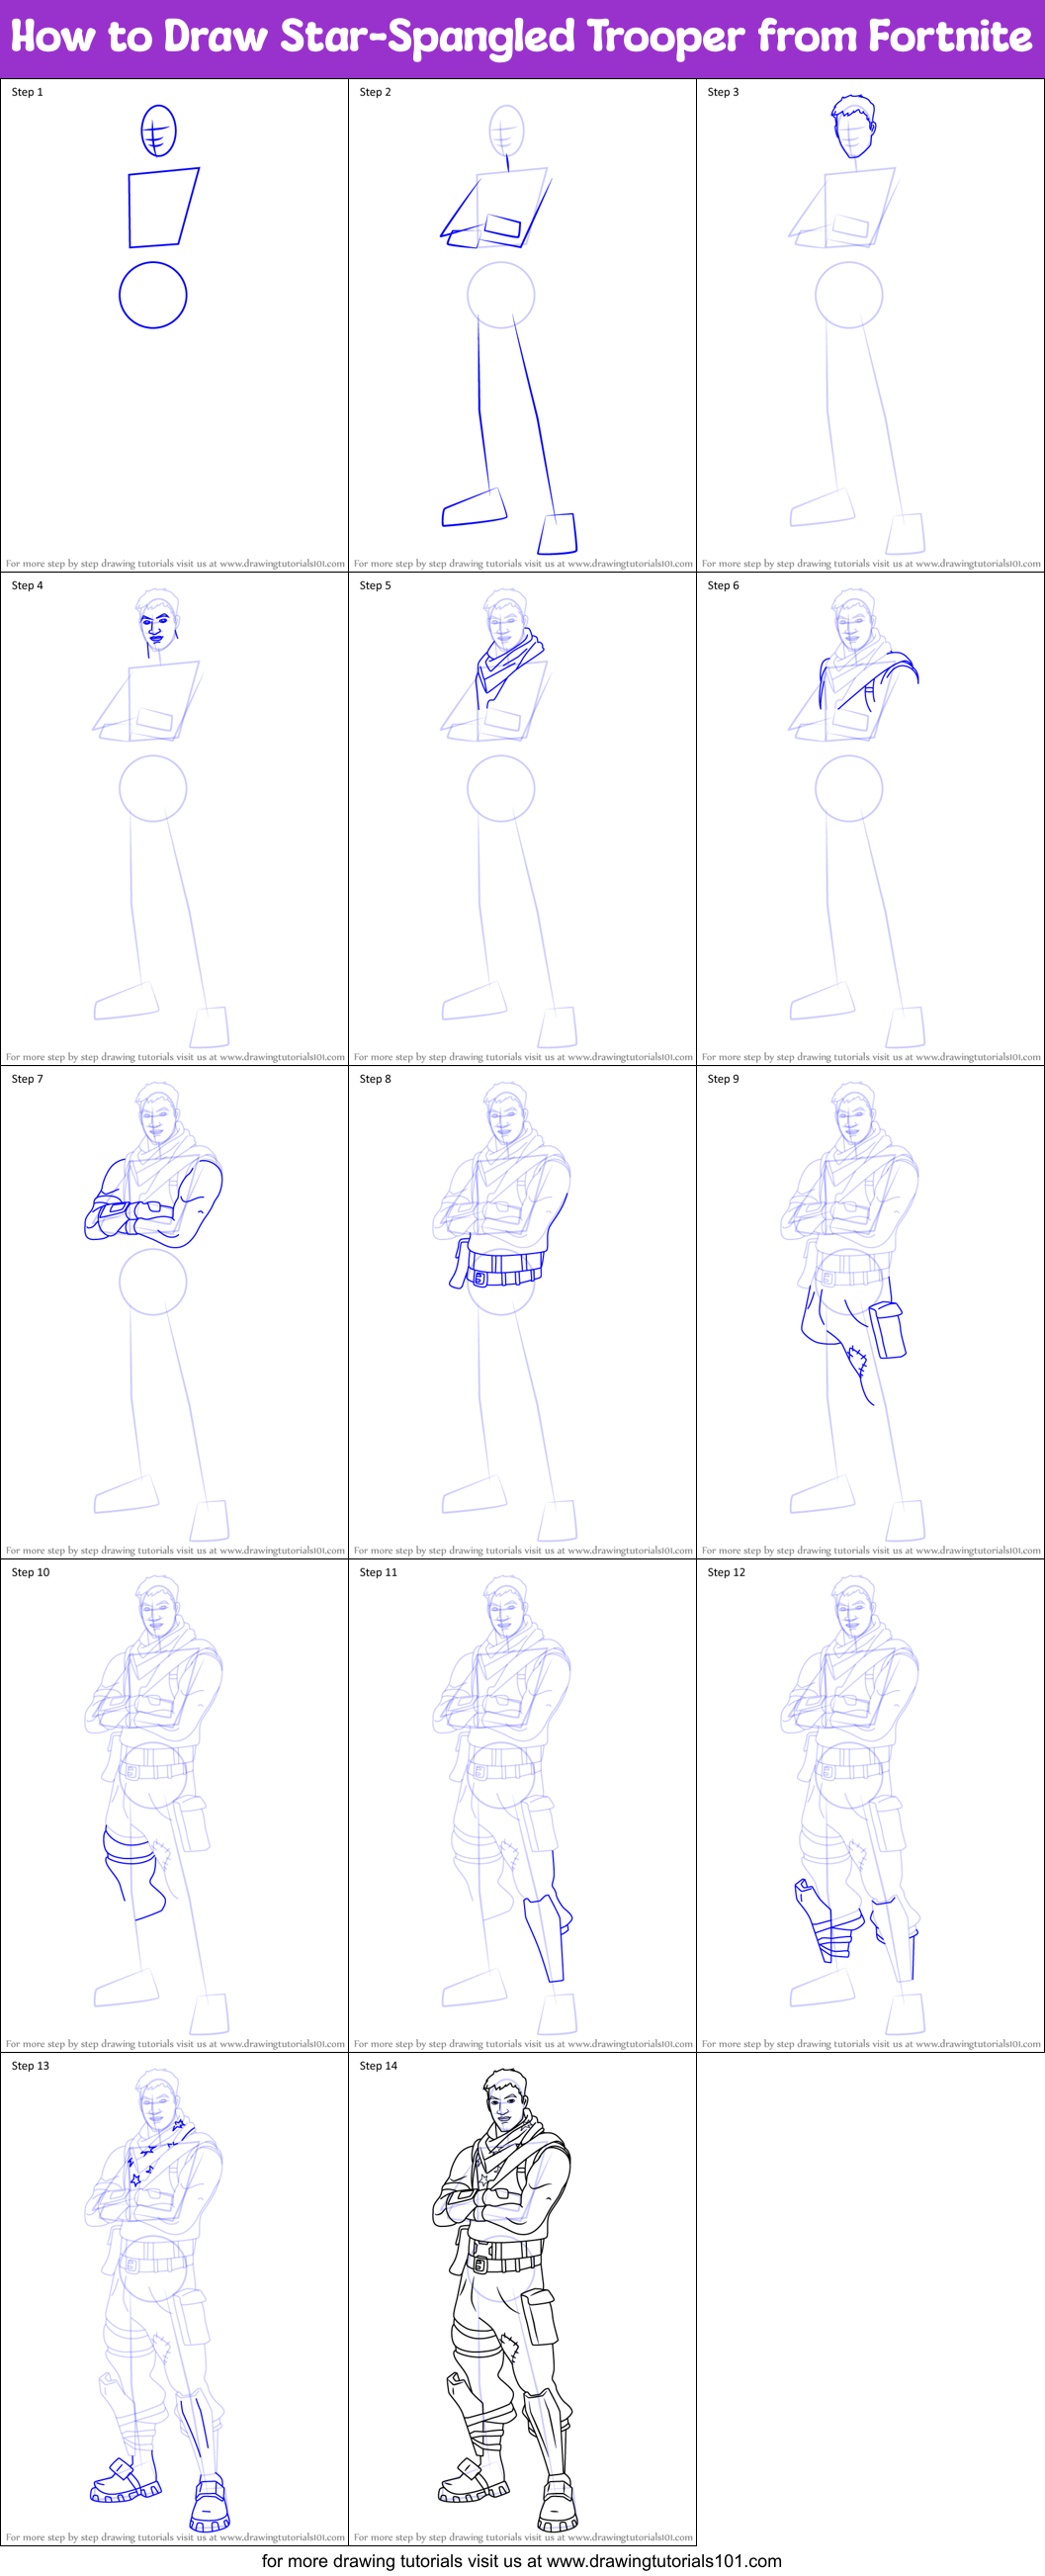 How to Draw Star-Spangled Trooper from Fortnite (Fortnite) Step by Step ...